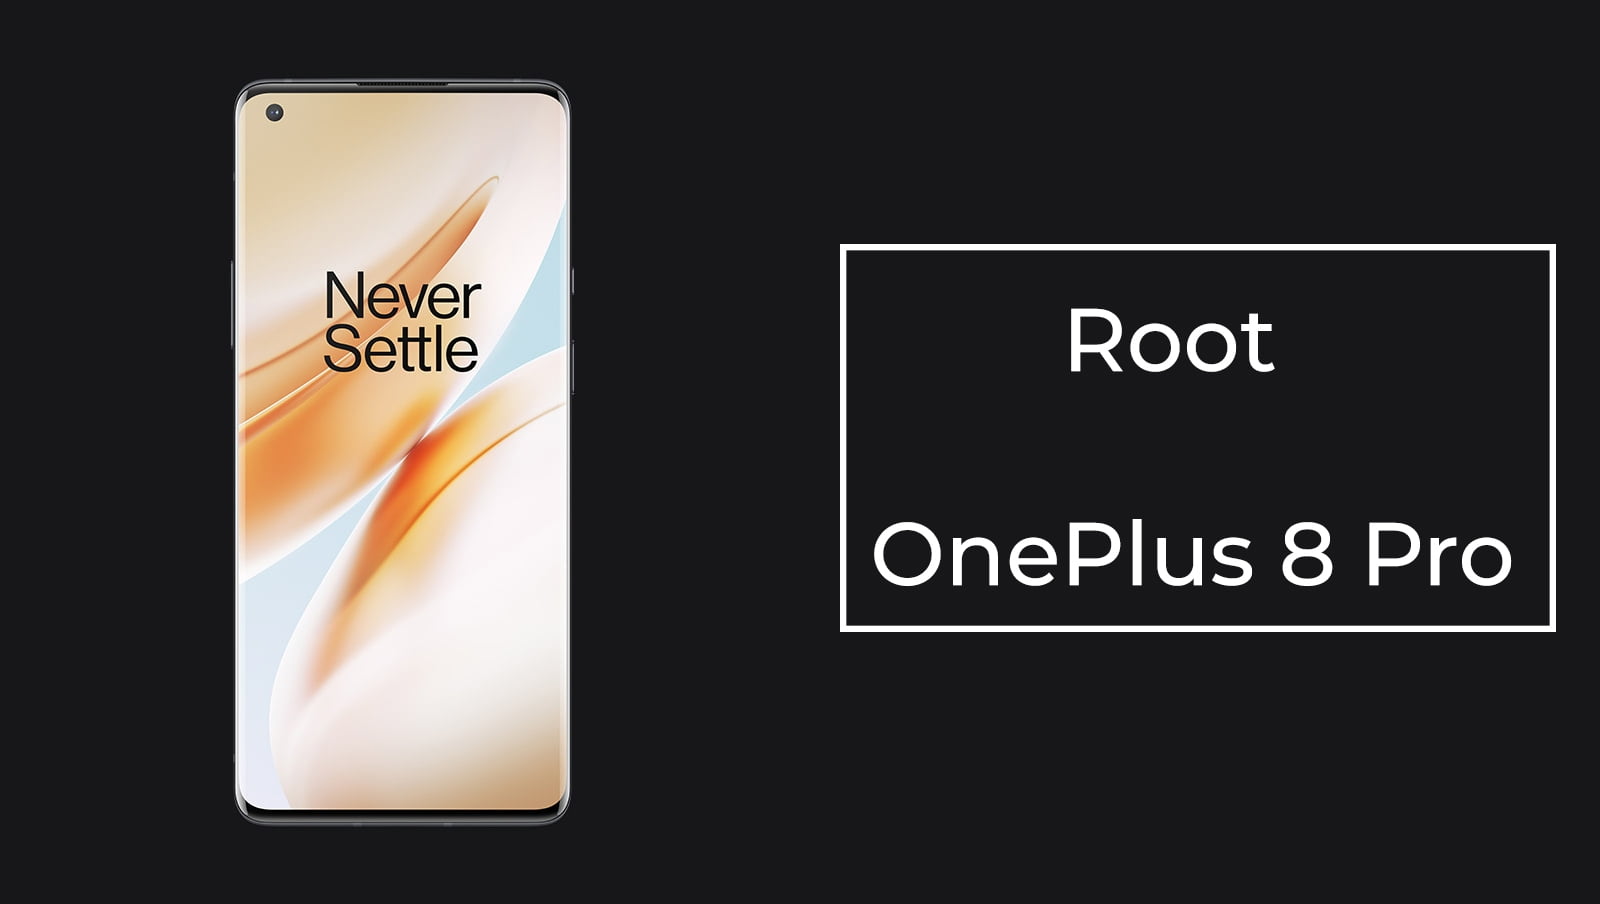 How to Root OnePlus 8 Pro